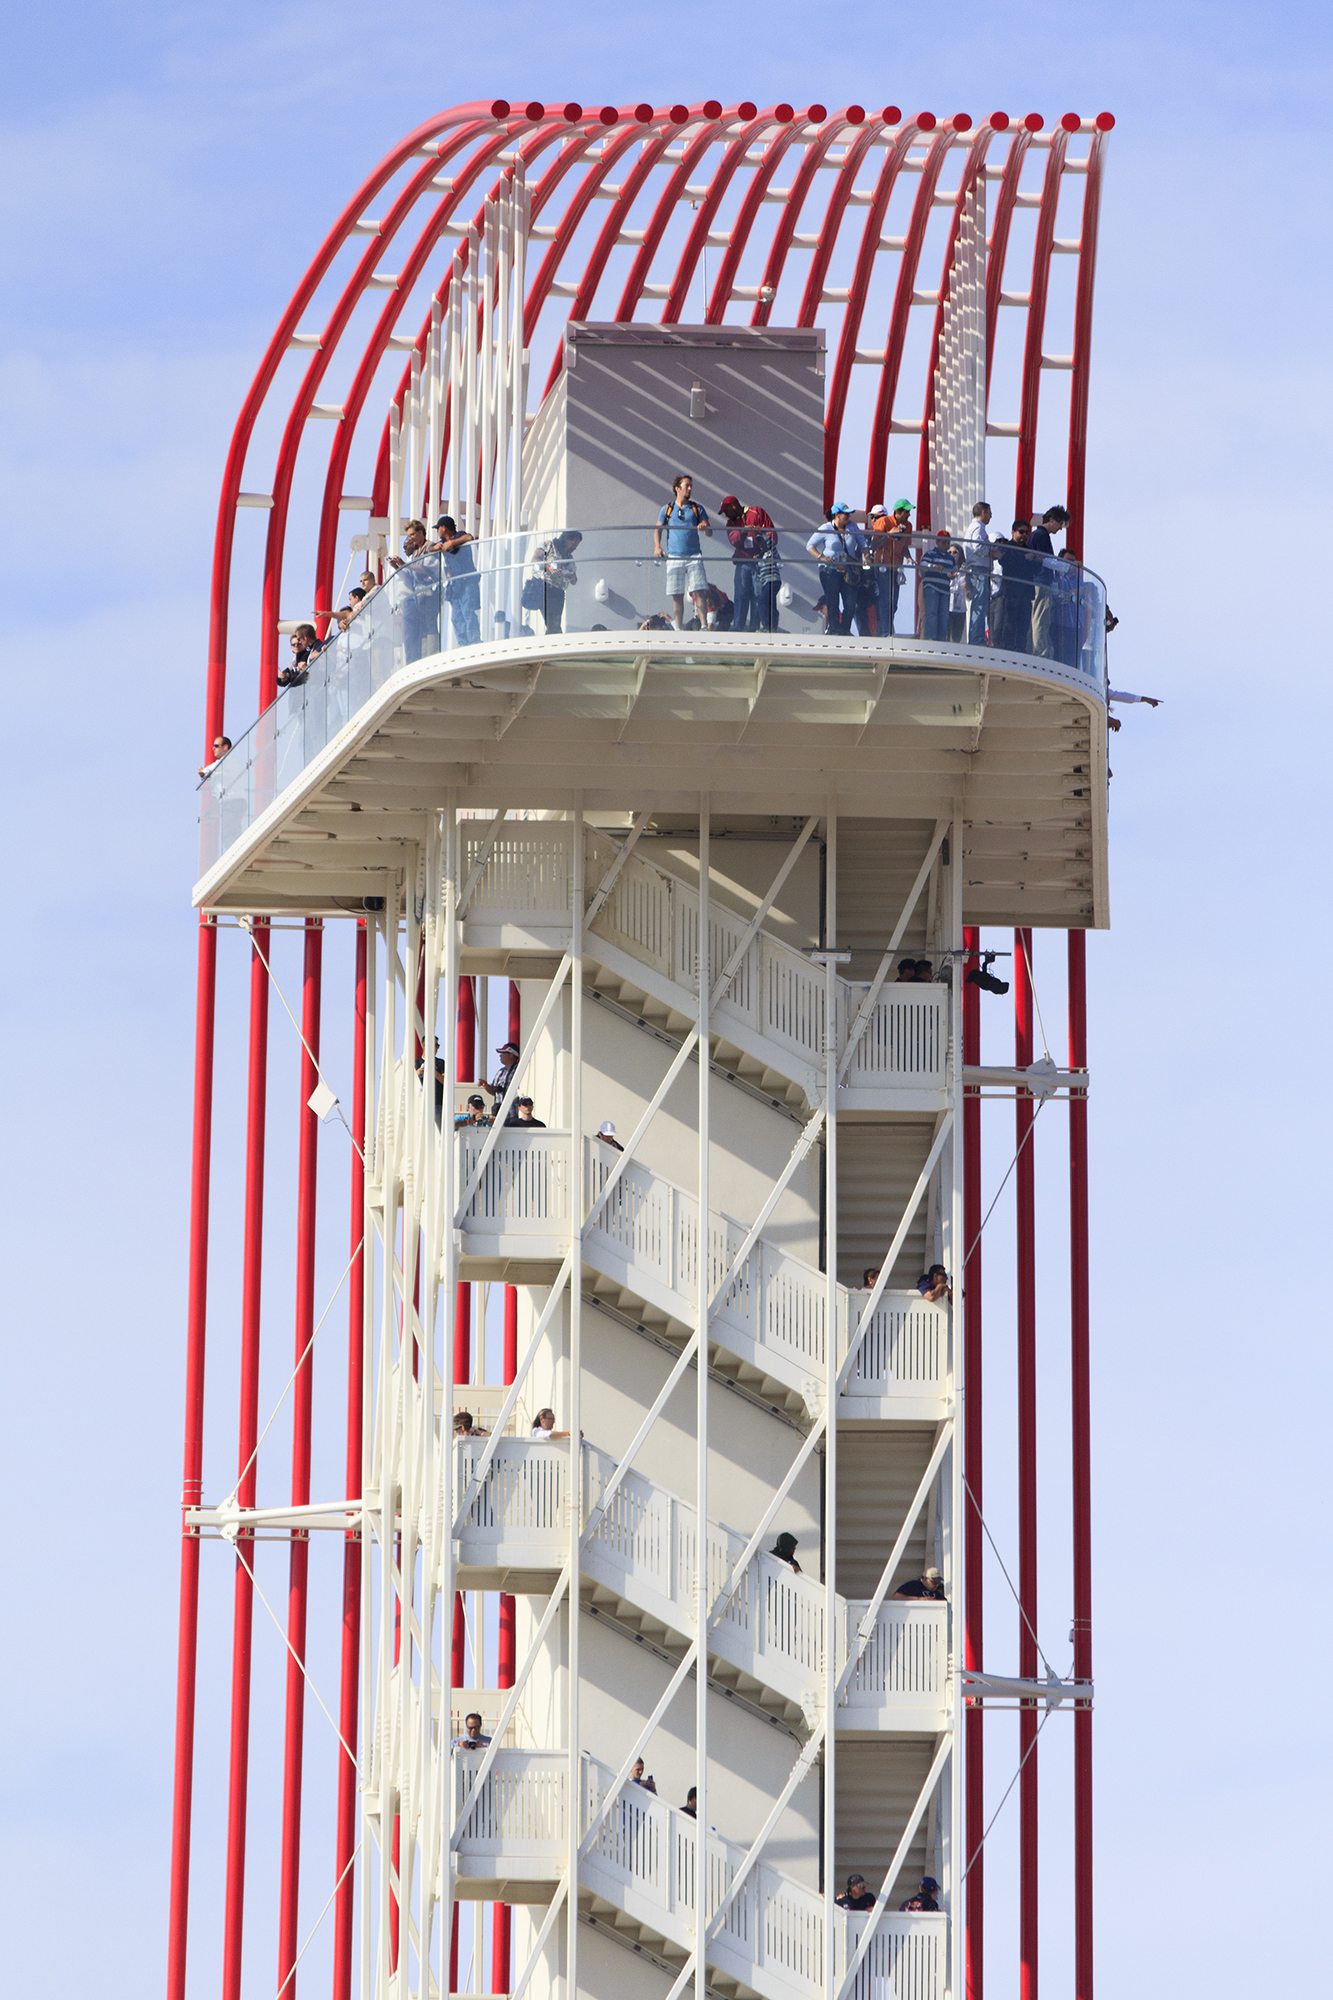 Observation tower at Circuit of the Americas